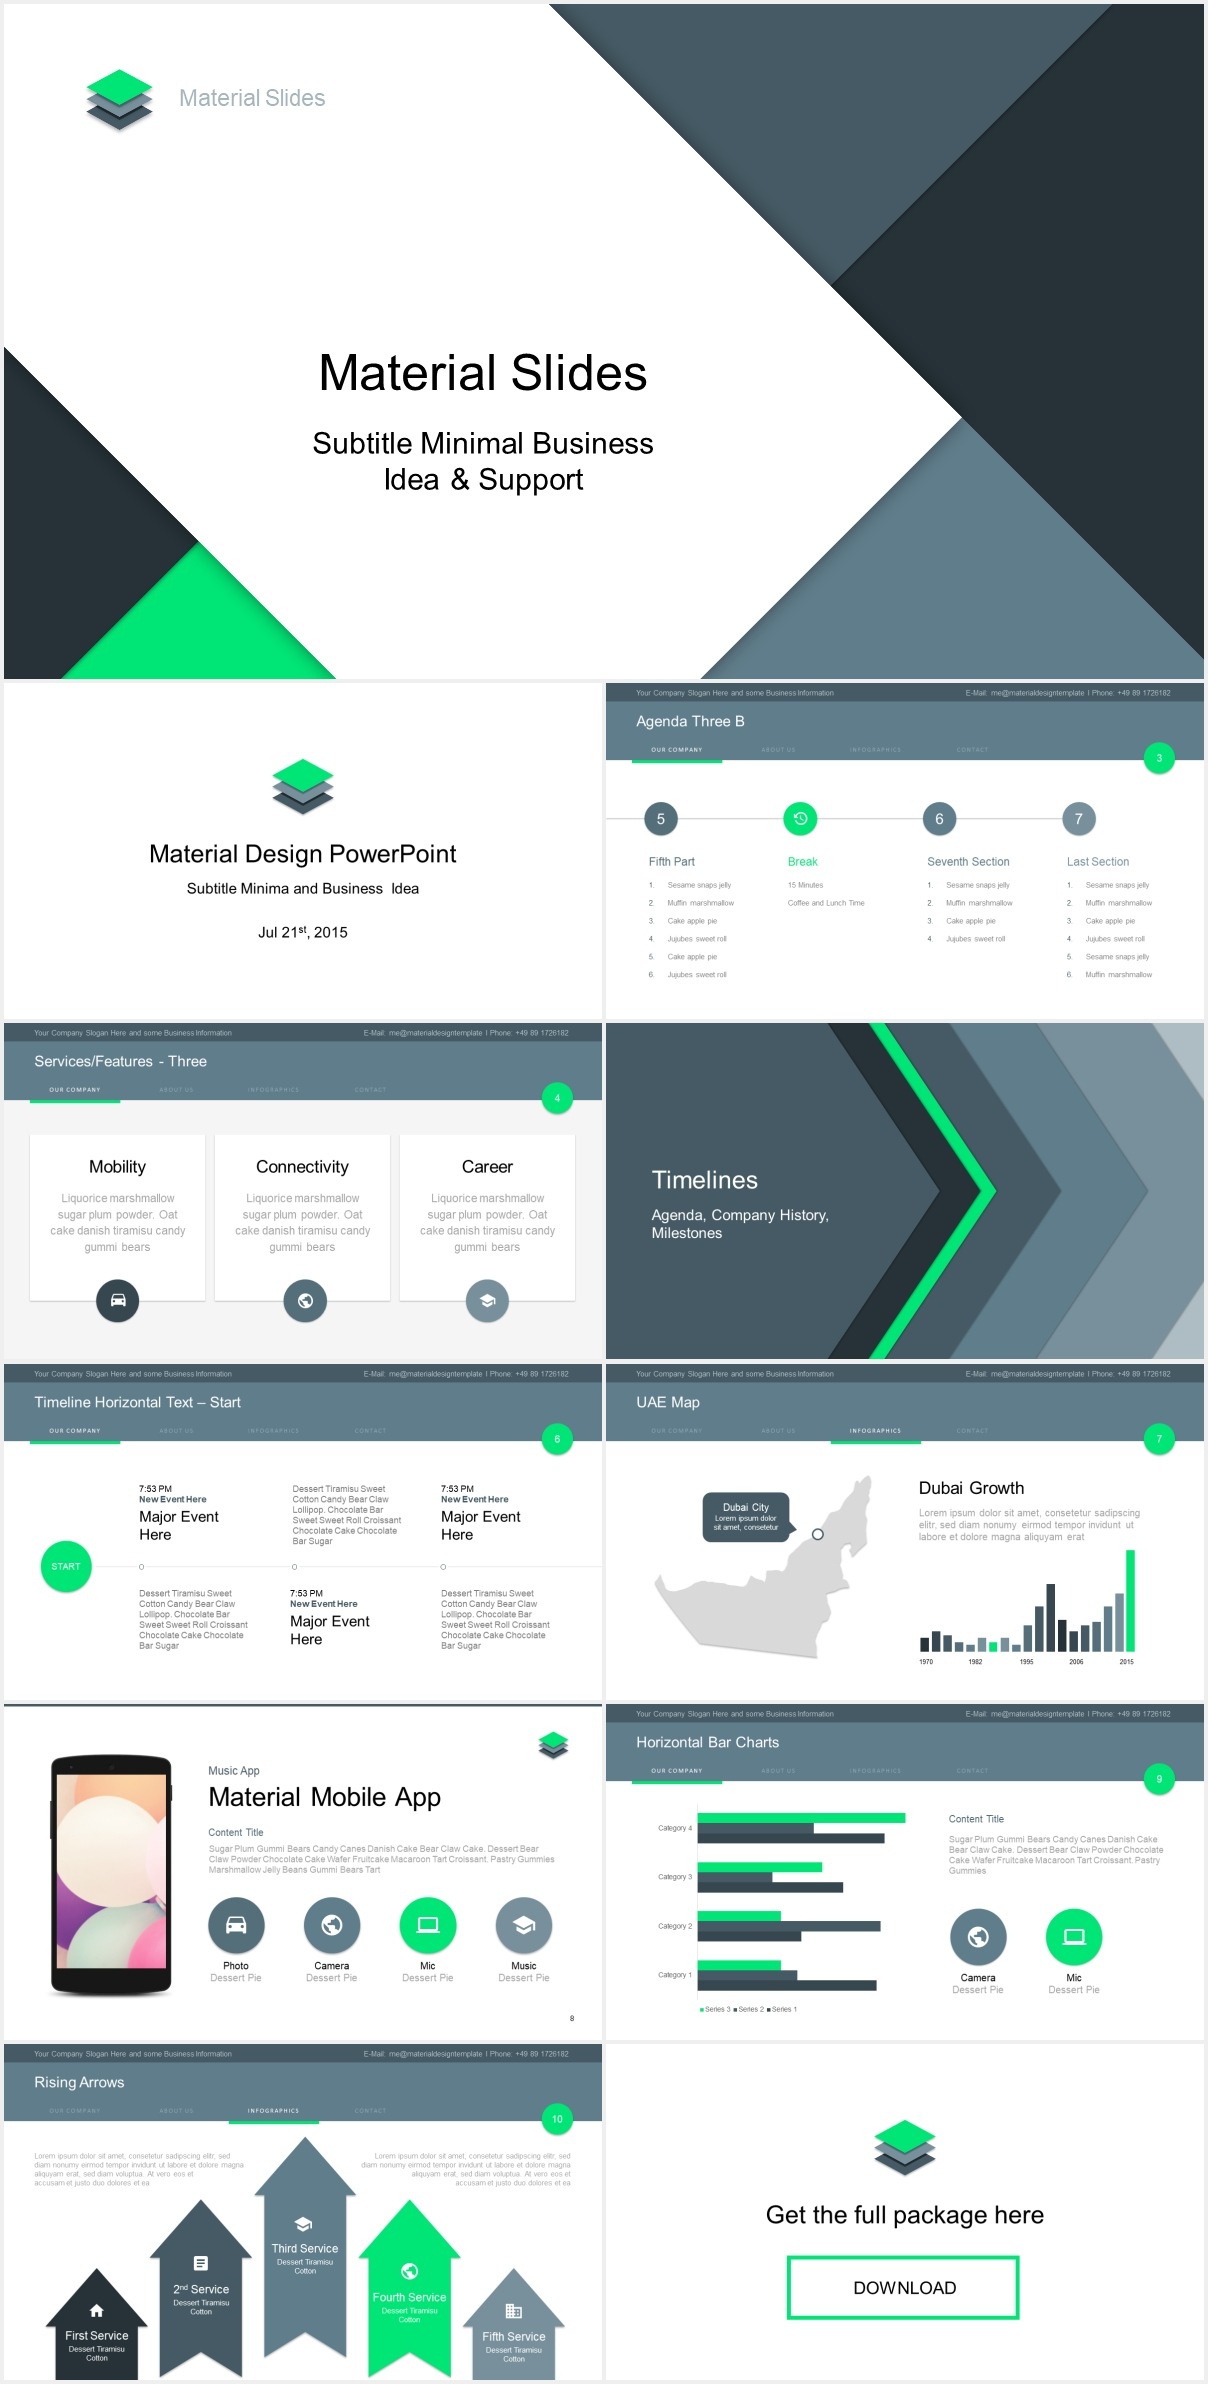 Material Design Powerpoint Template – Just Free Slides Inside Powerpoint Slides Design Templates For Free